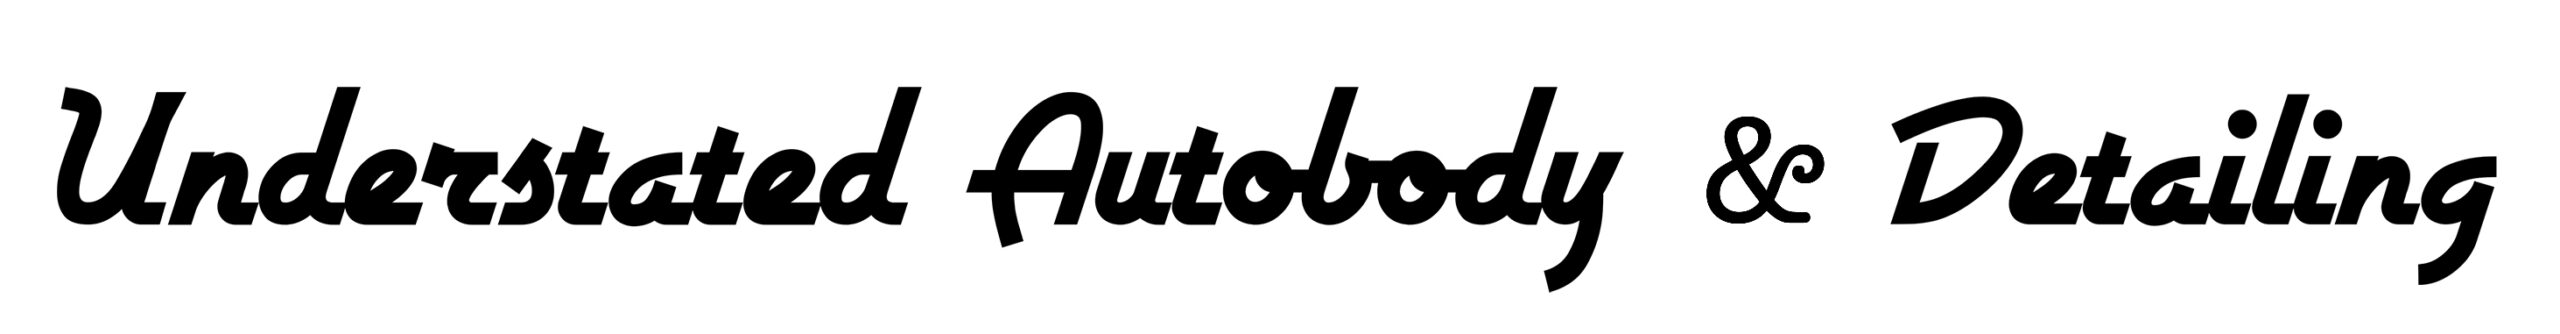 Logo for Understated Autobody & Detailing in Northbrook IL